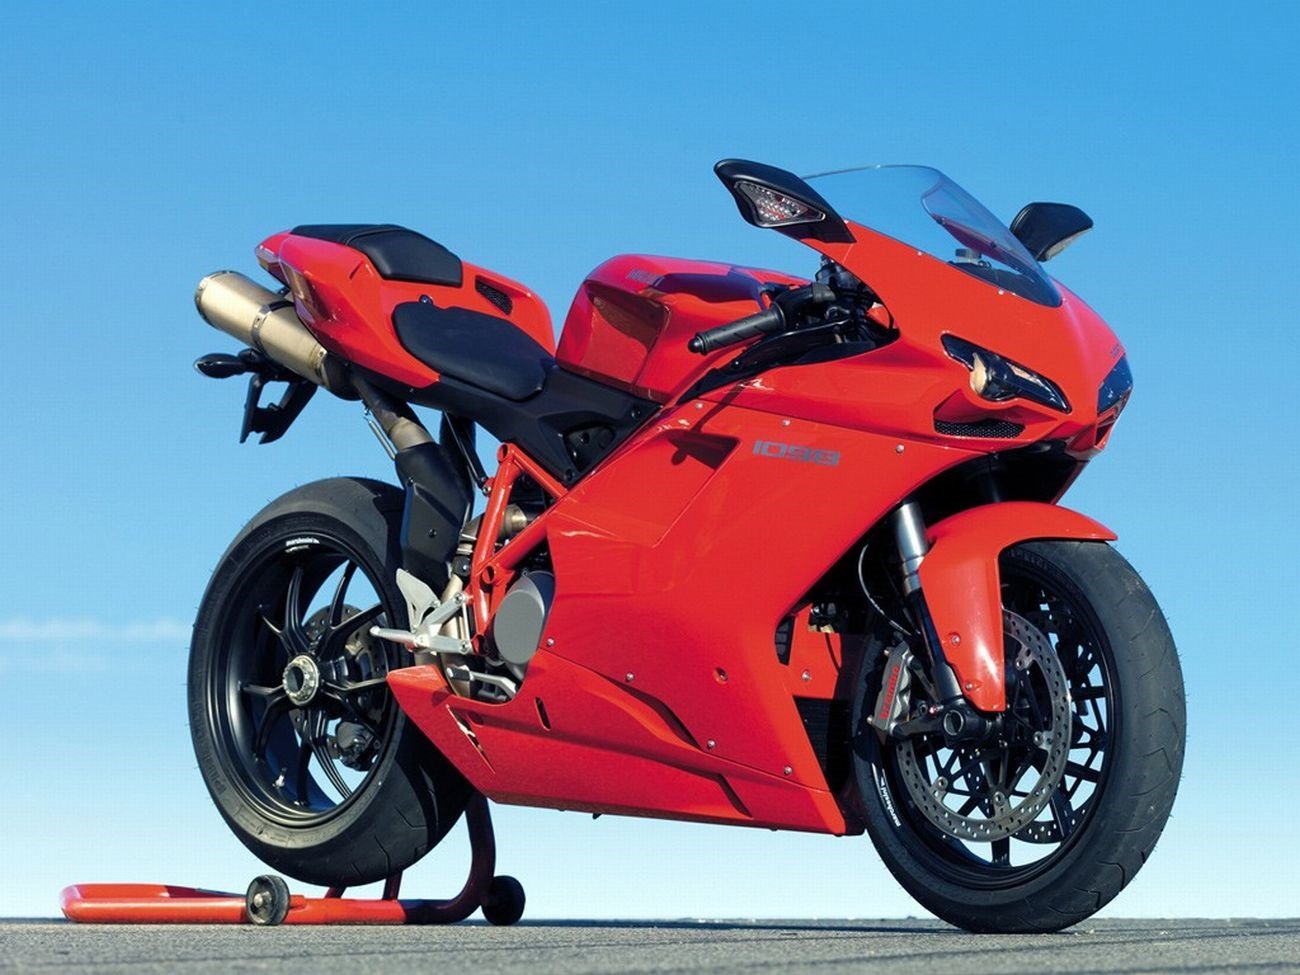 Ducati 1098 Photo and Video Review Comments